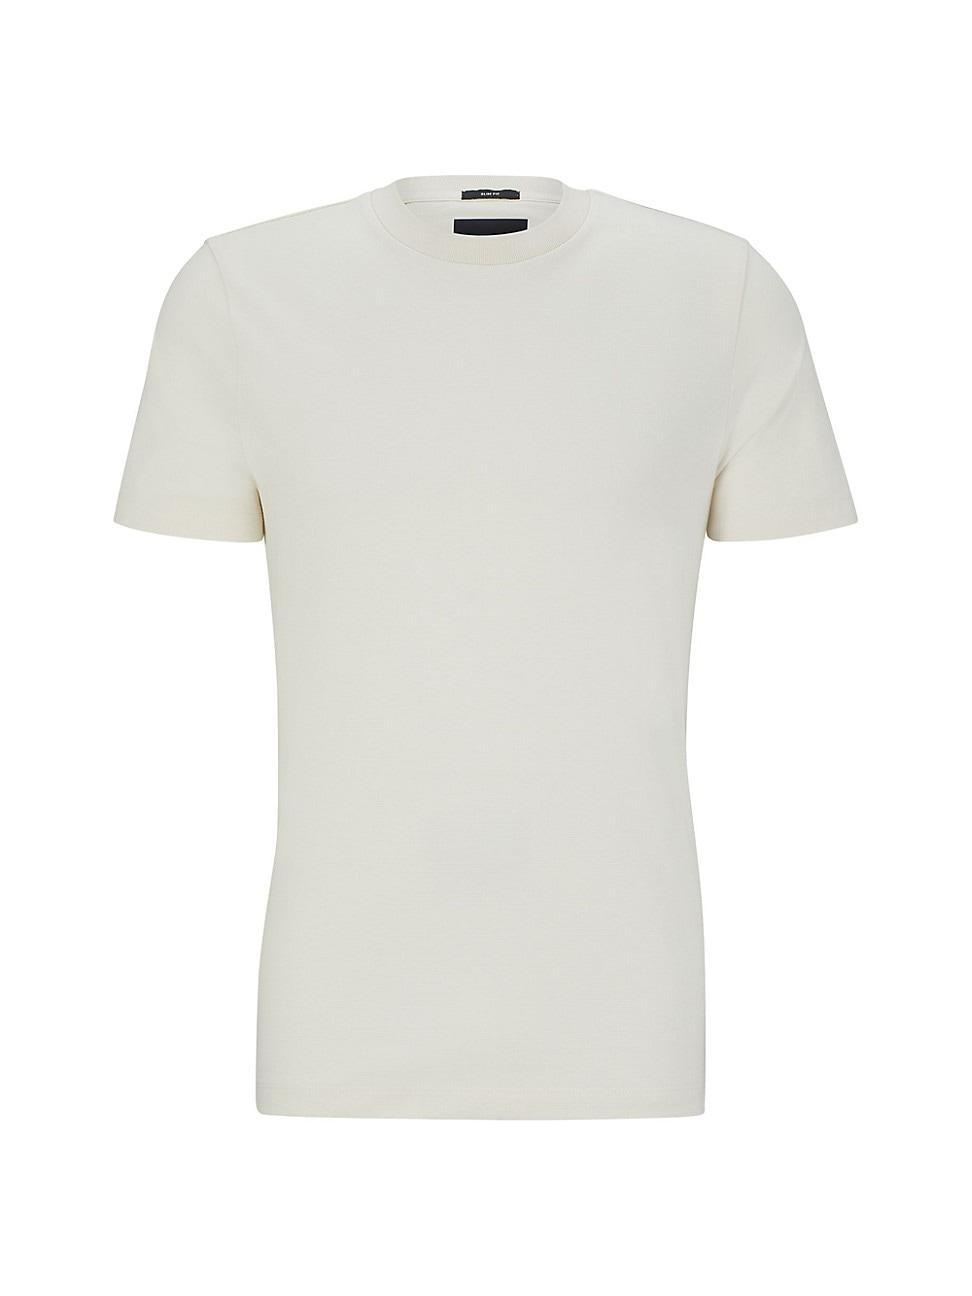 Mens Cotton-Jersey T-Shirt With Printed Logo Product Image